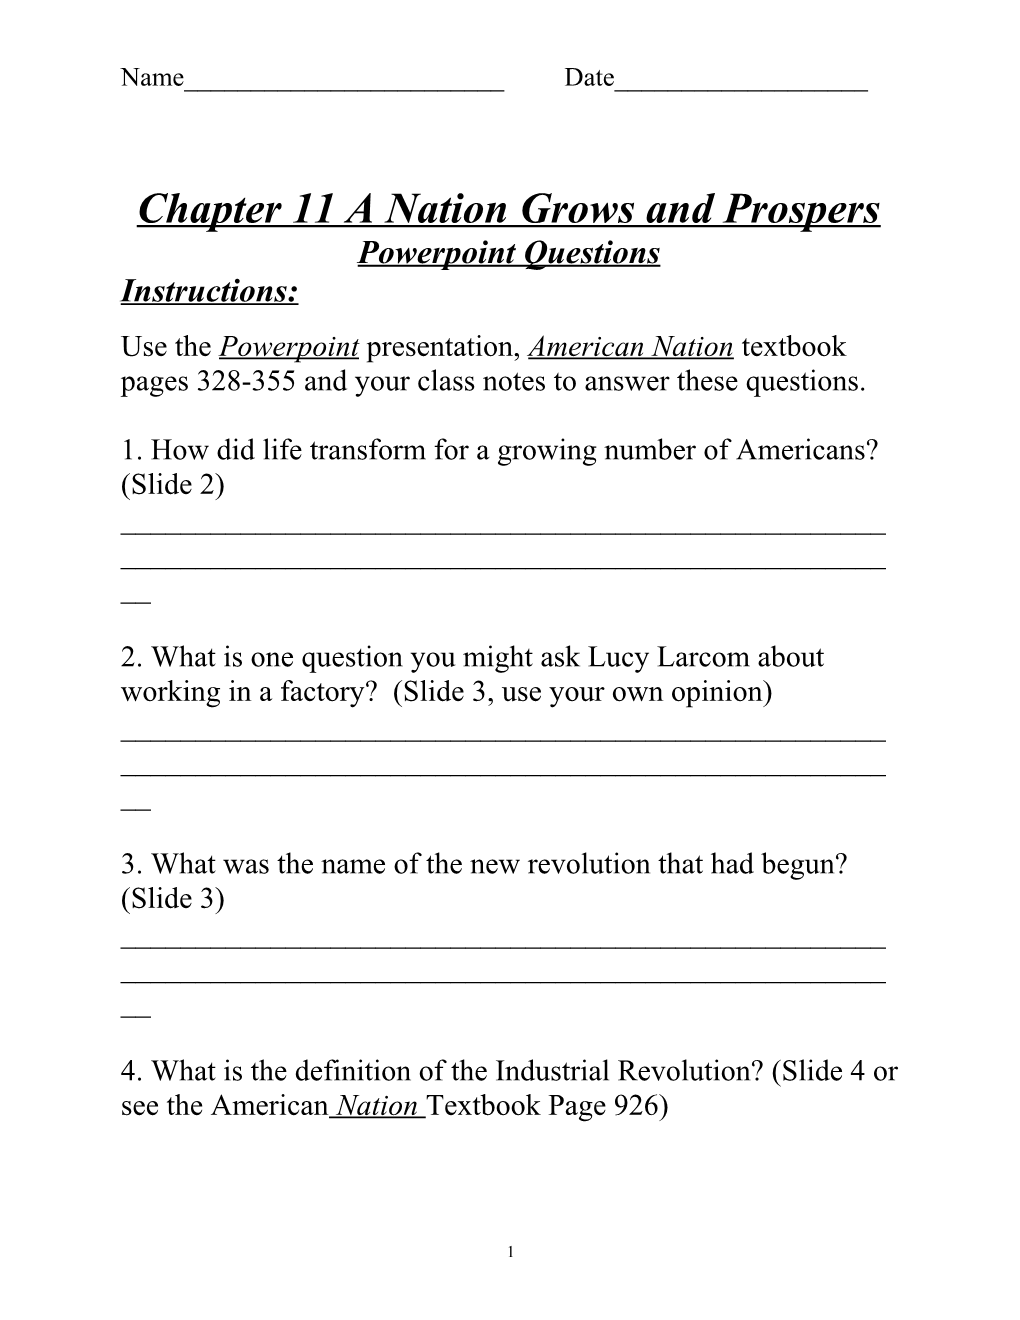 Chapter 11A Nation Grows and Prospers